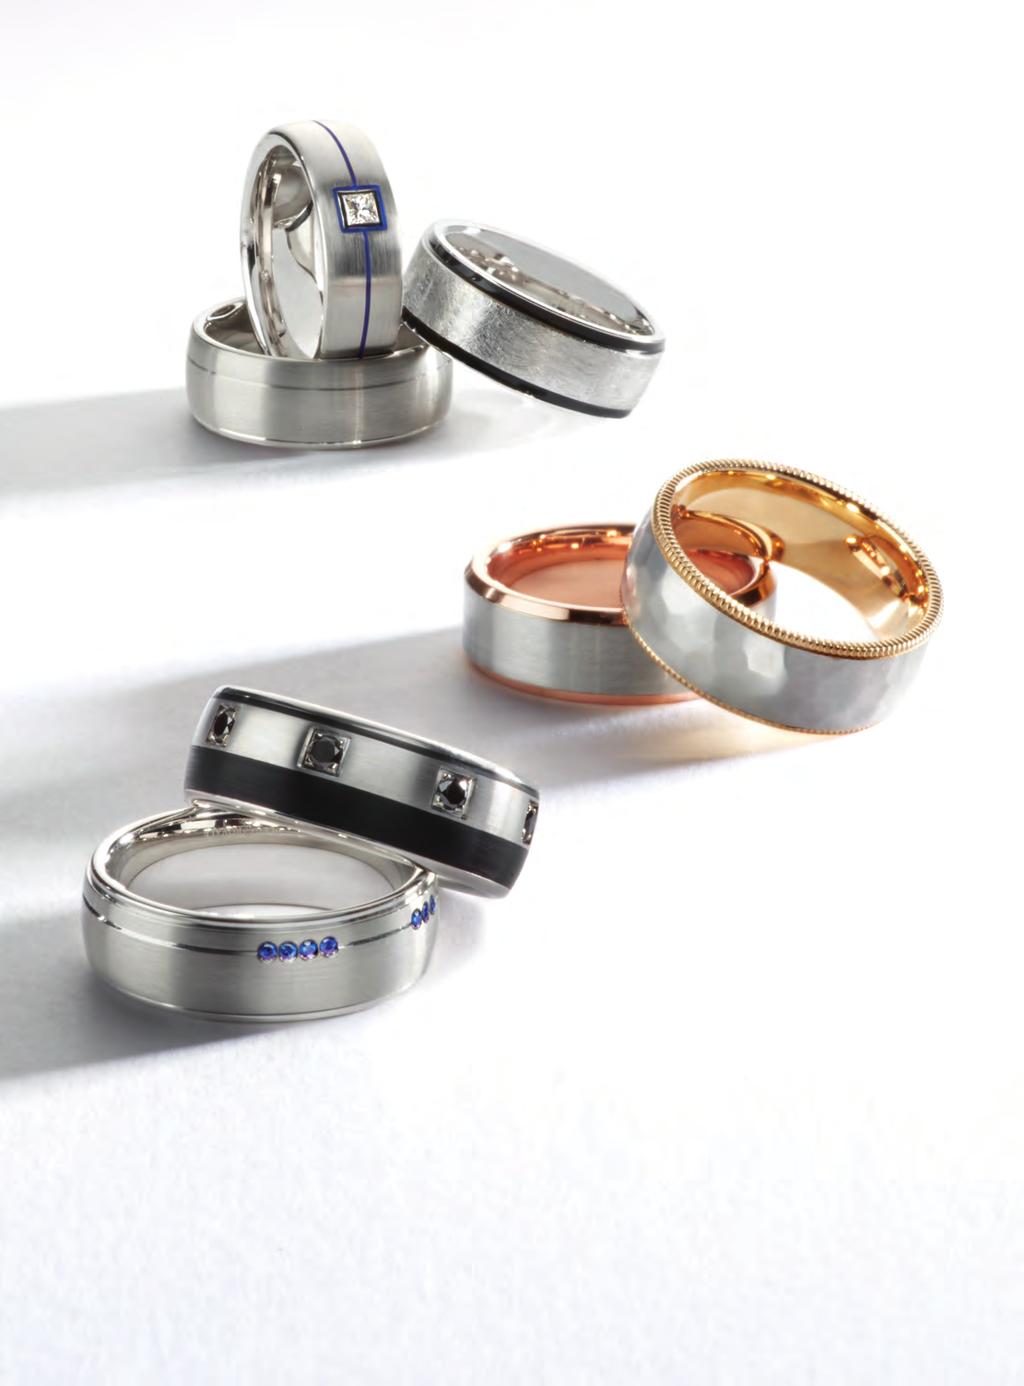 WEDDING $1,920 WEDDING Since 1858 Furrer-Jacot has been specializing in customized and unique wedding bands. Each band expresses the promise of a vow, a shared hope and happiness a bond forever.